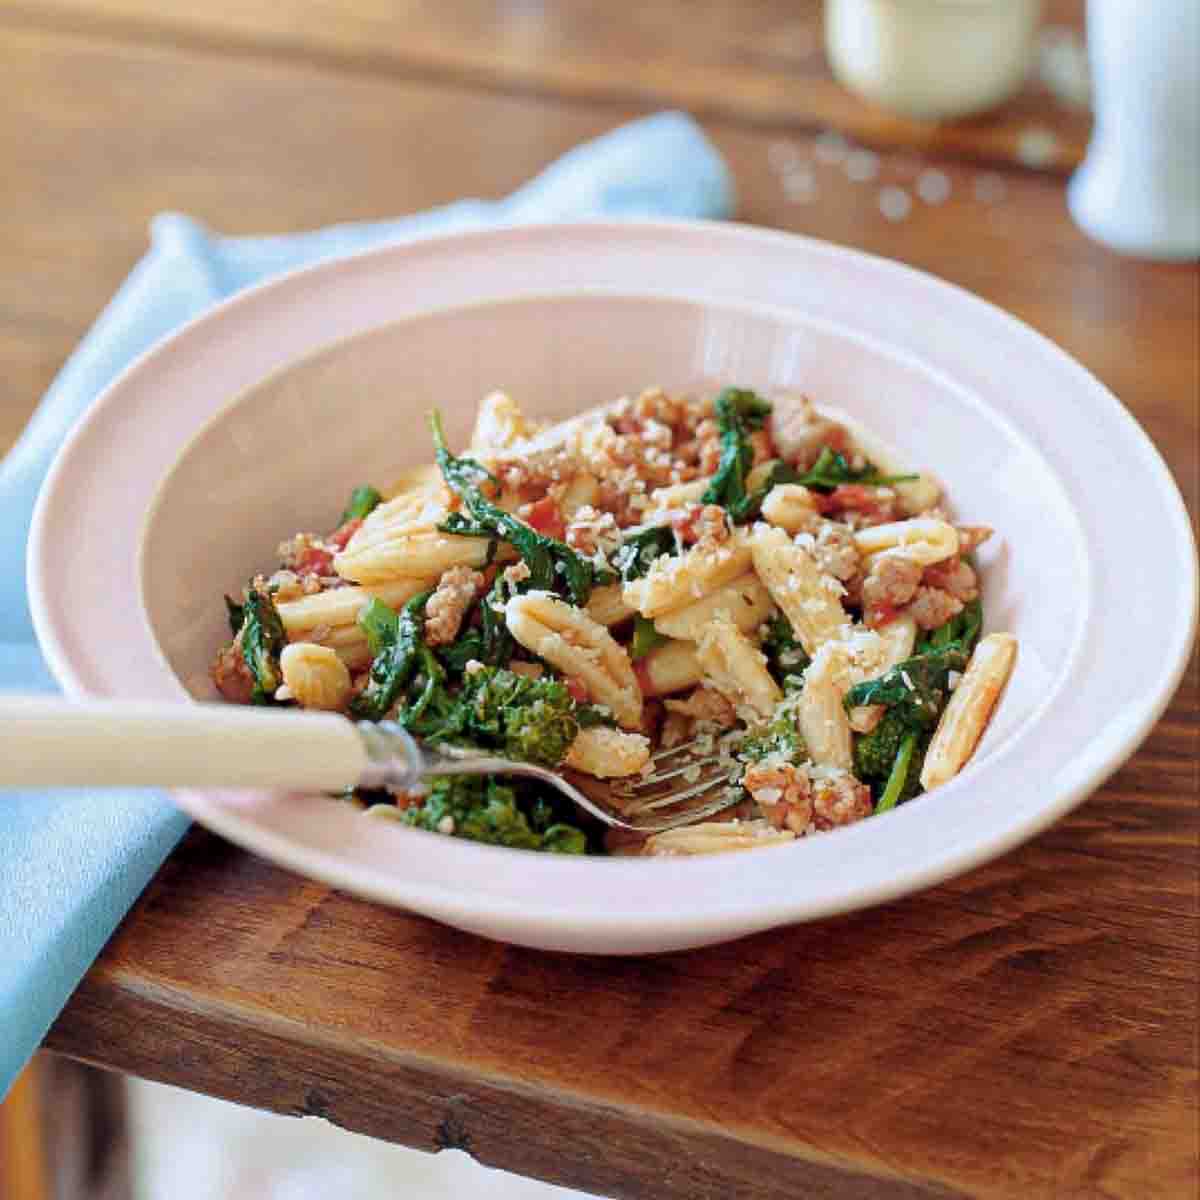 Bowl of cavatelli with turkey sausage, tomato, and broccoli rabe on a table, with a spoon.